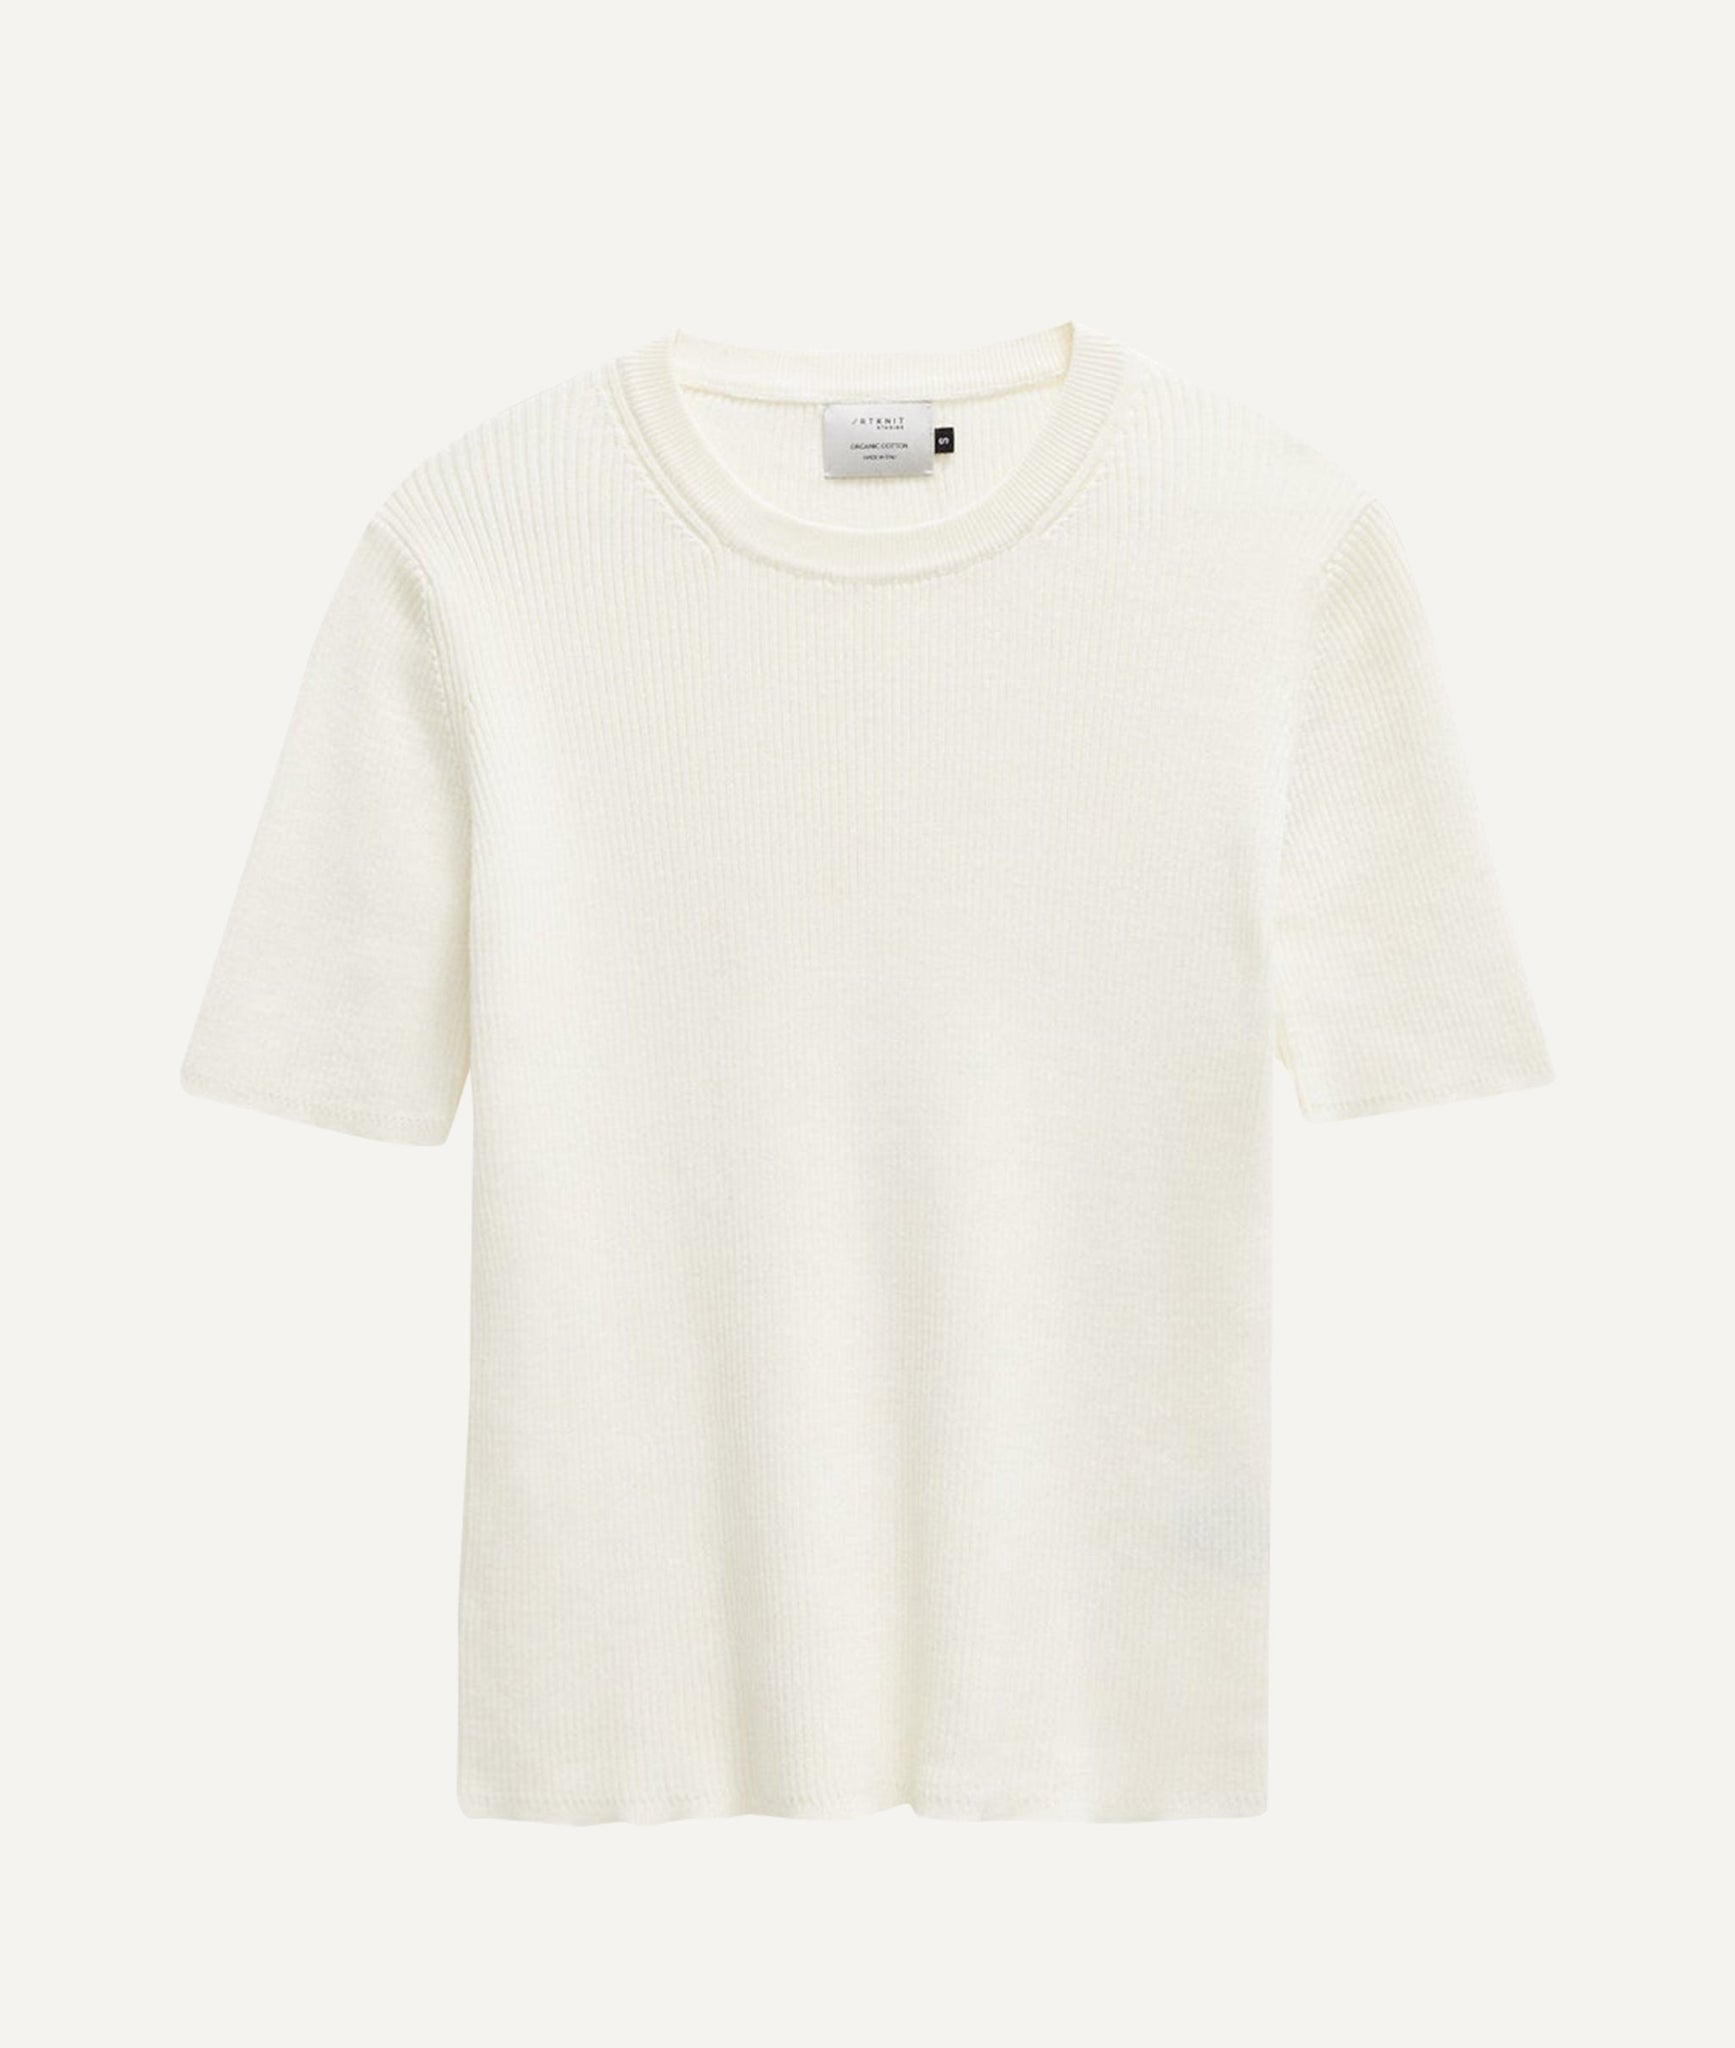 The Organic Cotton Ribbed Tee